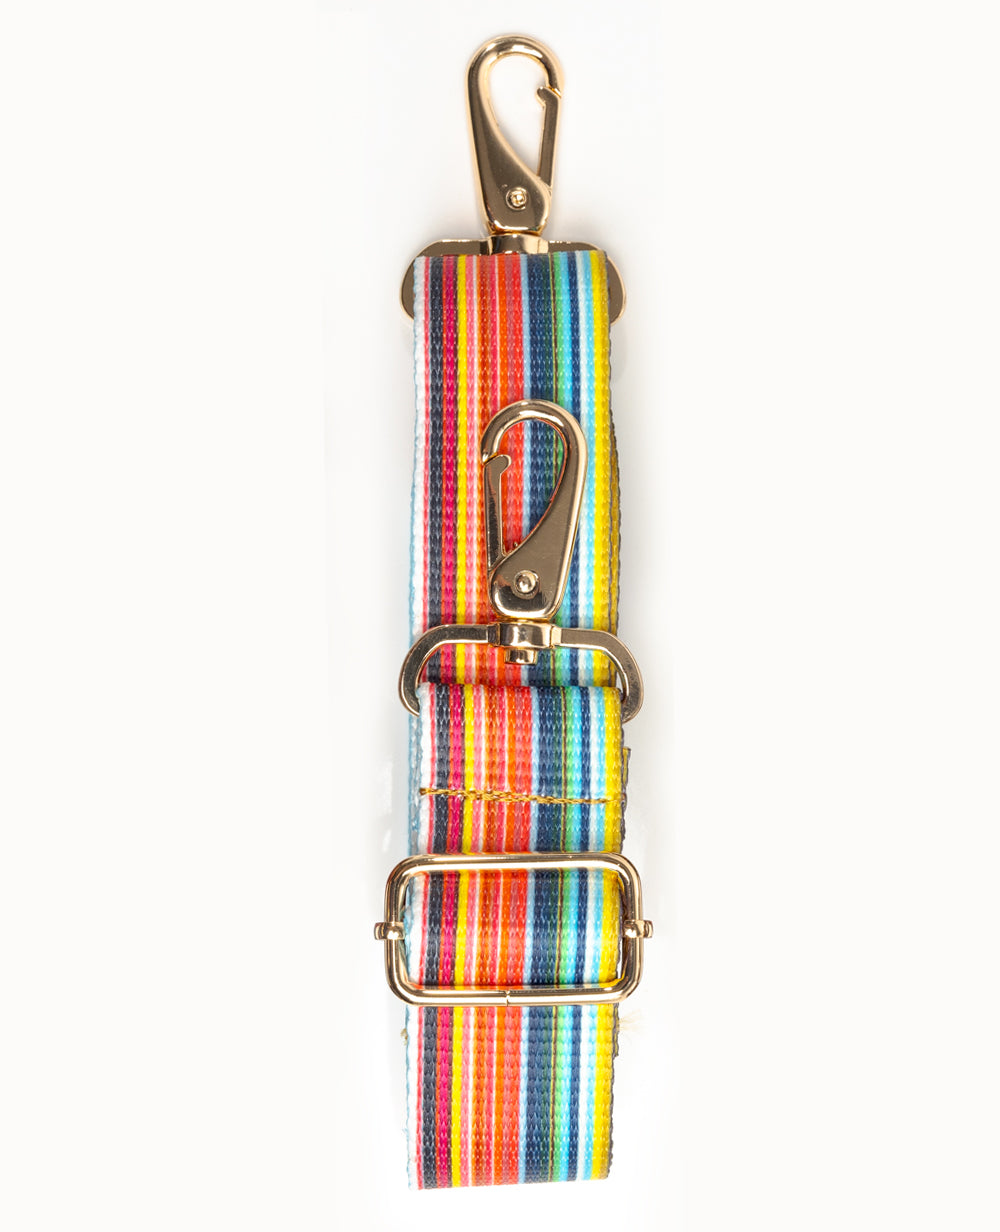 Vertical striped rainbow purse strap with gold hardware